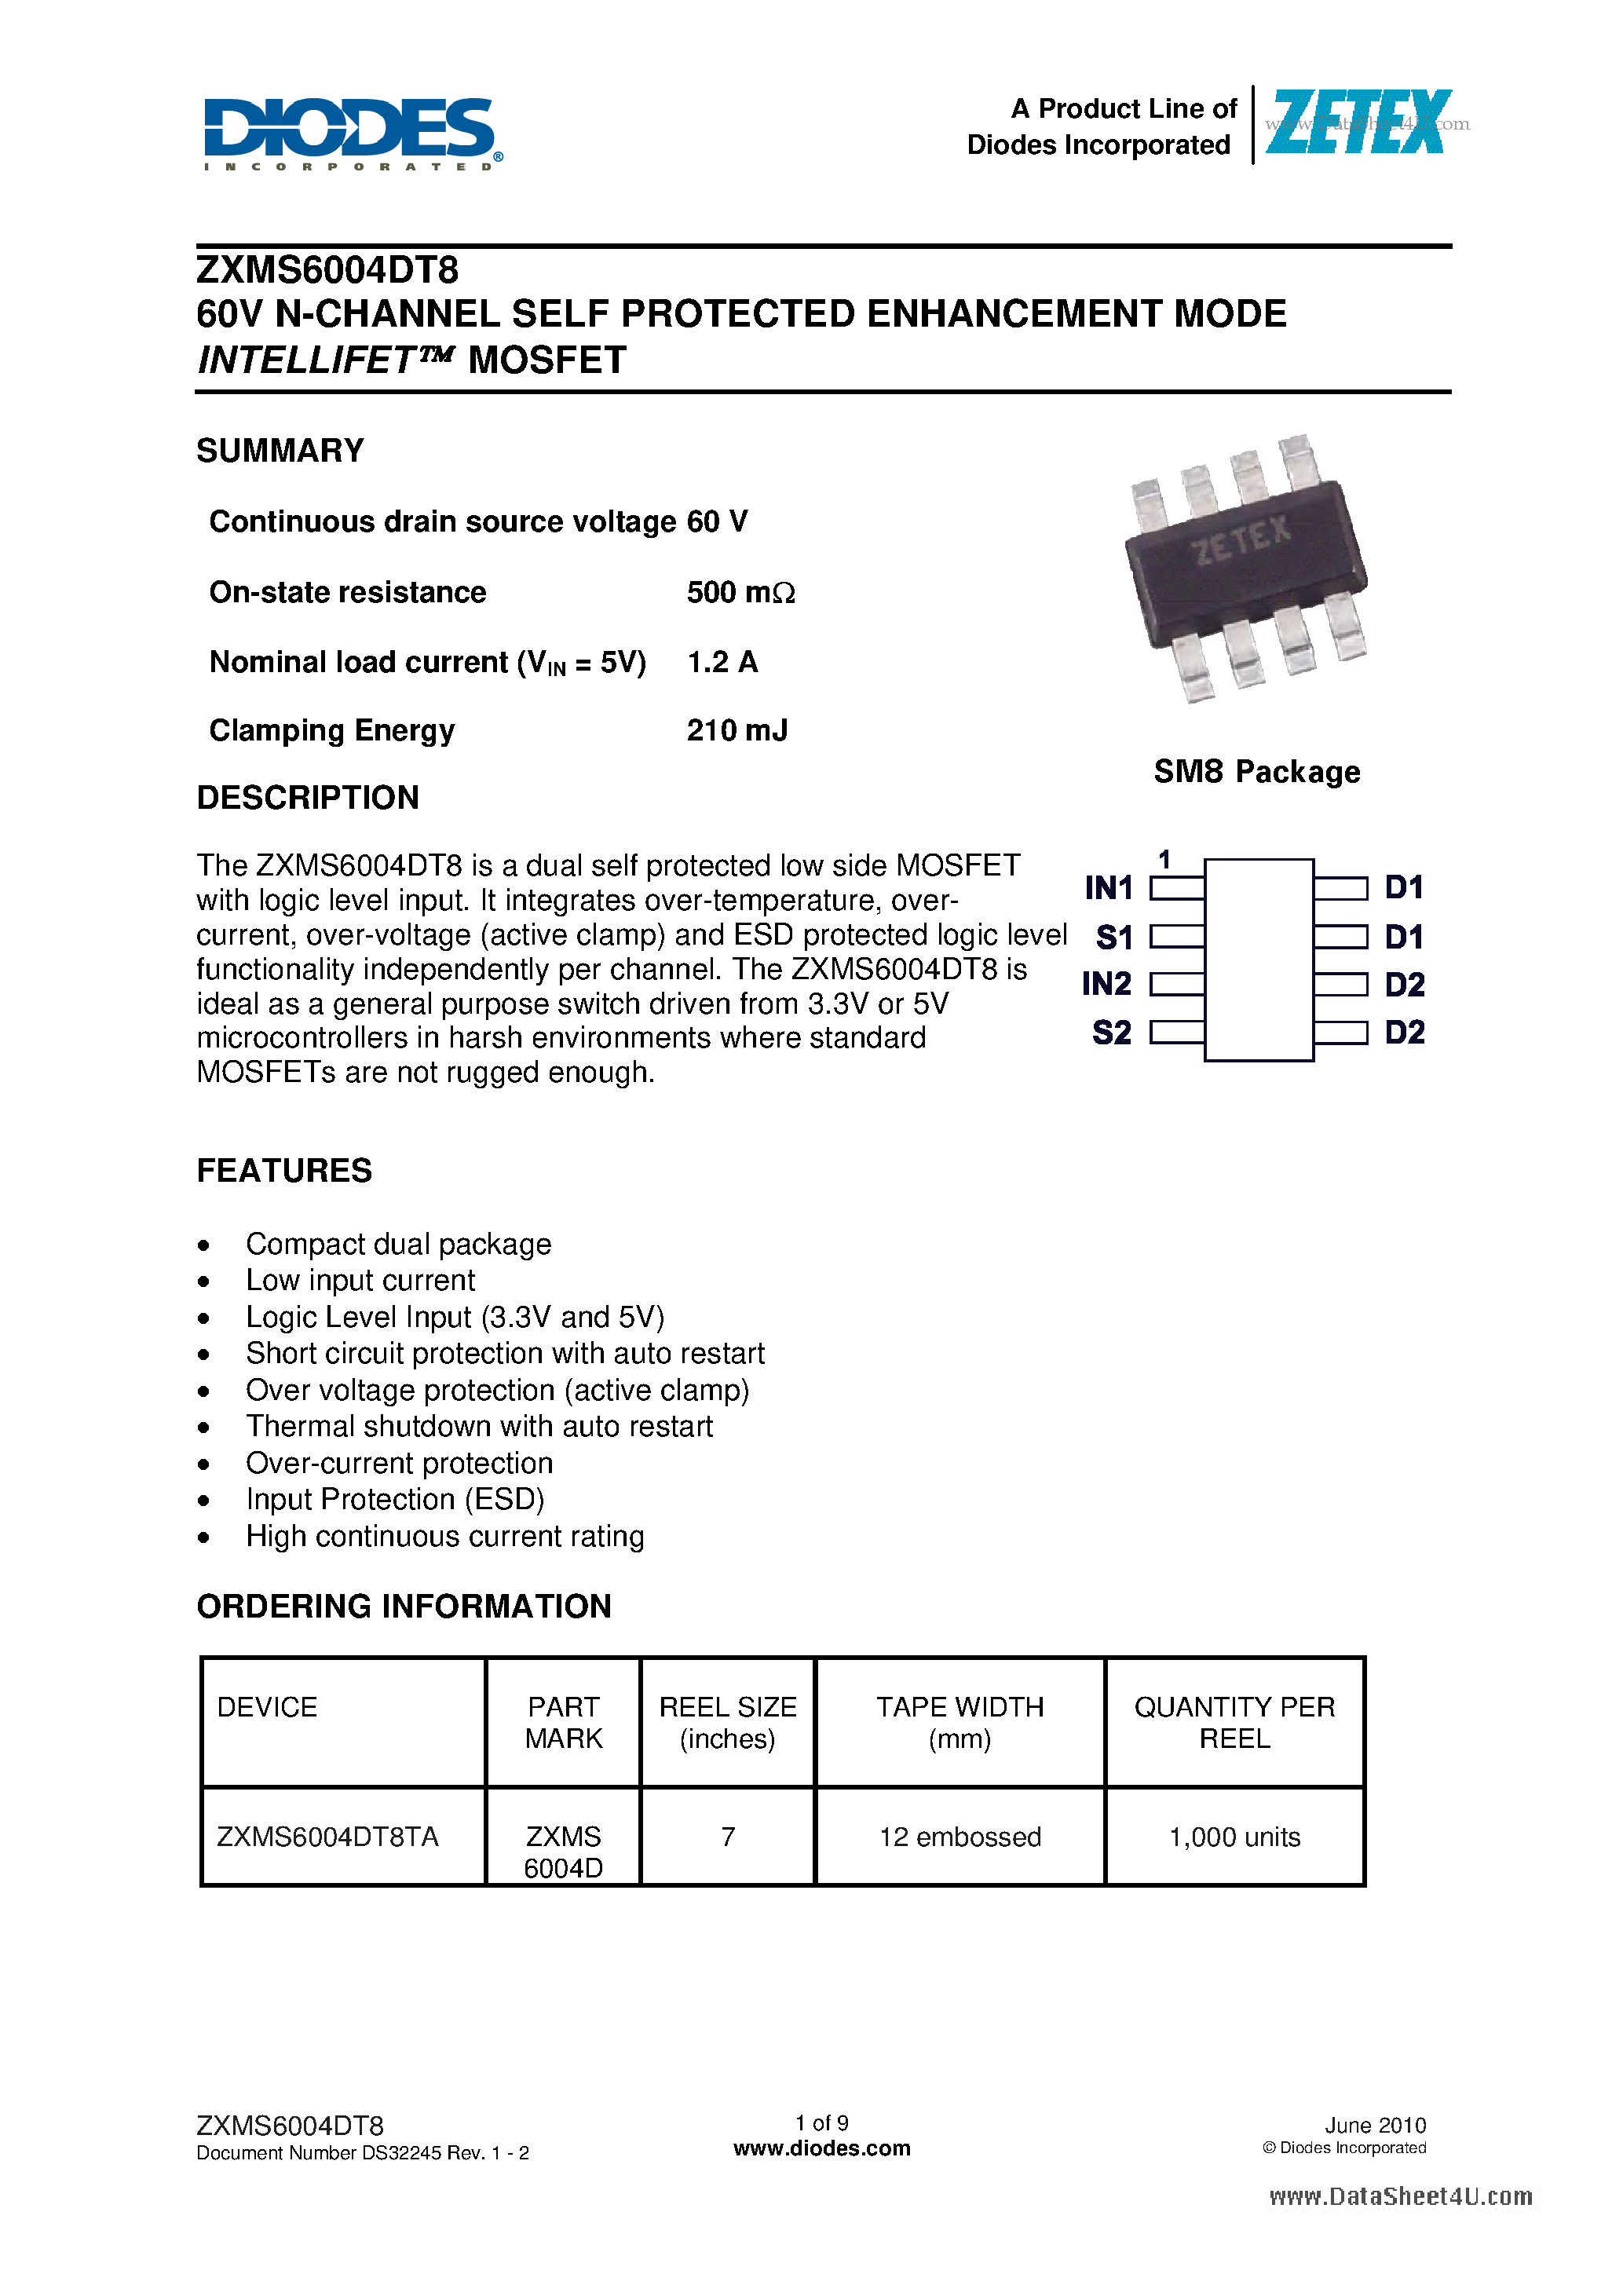 Даташит ZXMS6004DT8 - 60V N-CHANNEL SELF PROTECTED ENHANCEMENT MODE INTELLIFET MOSFET страница 1